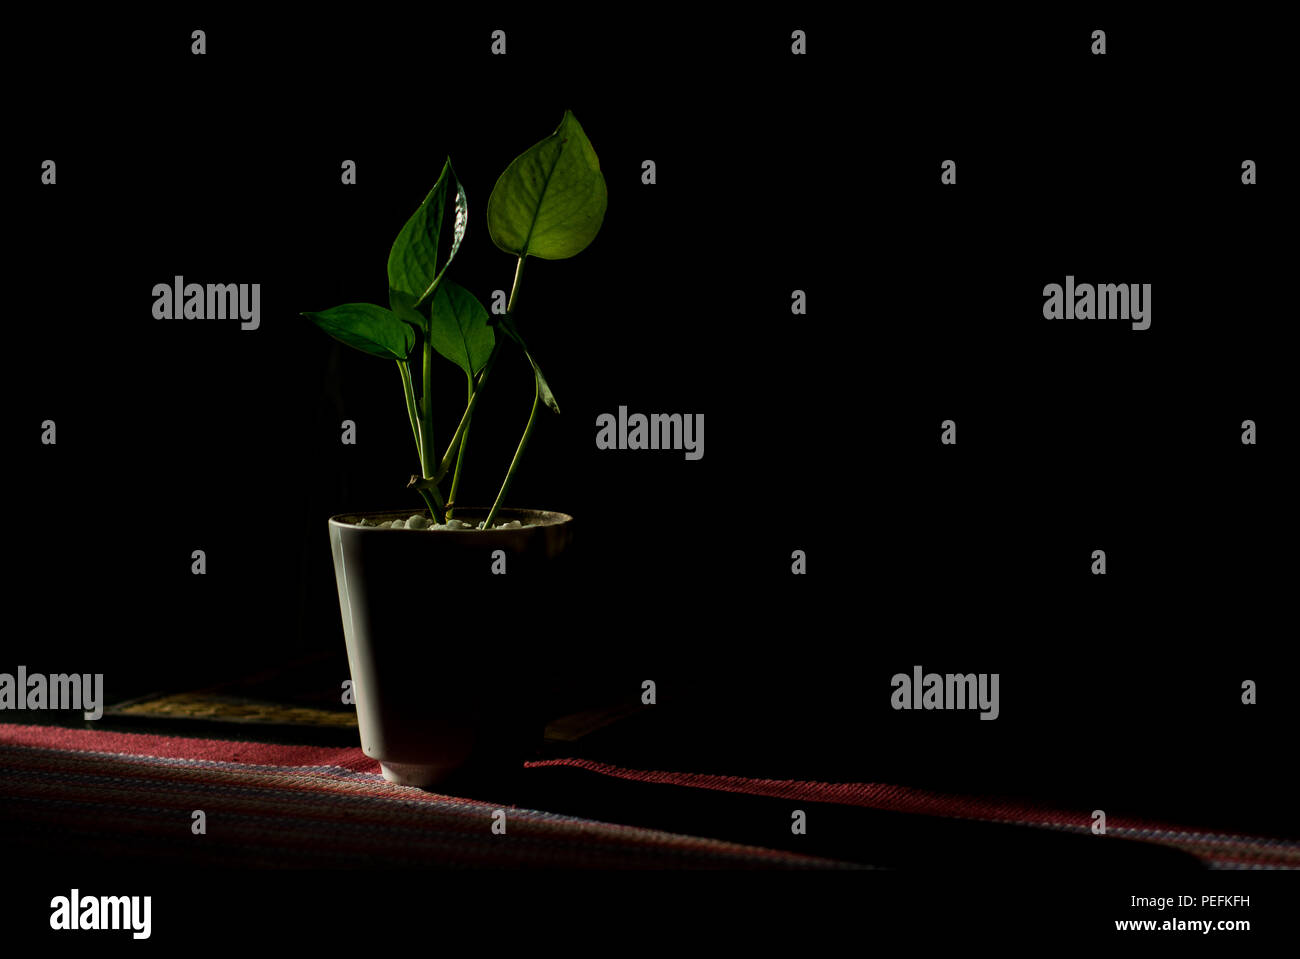 Indoor decoration money plant for good vibe and healthy green leaves indoor plant Stock Photo